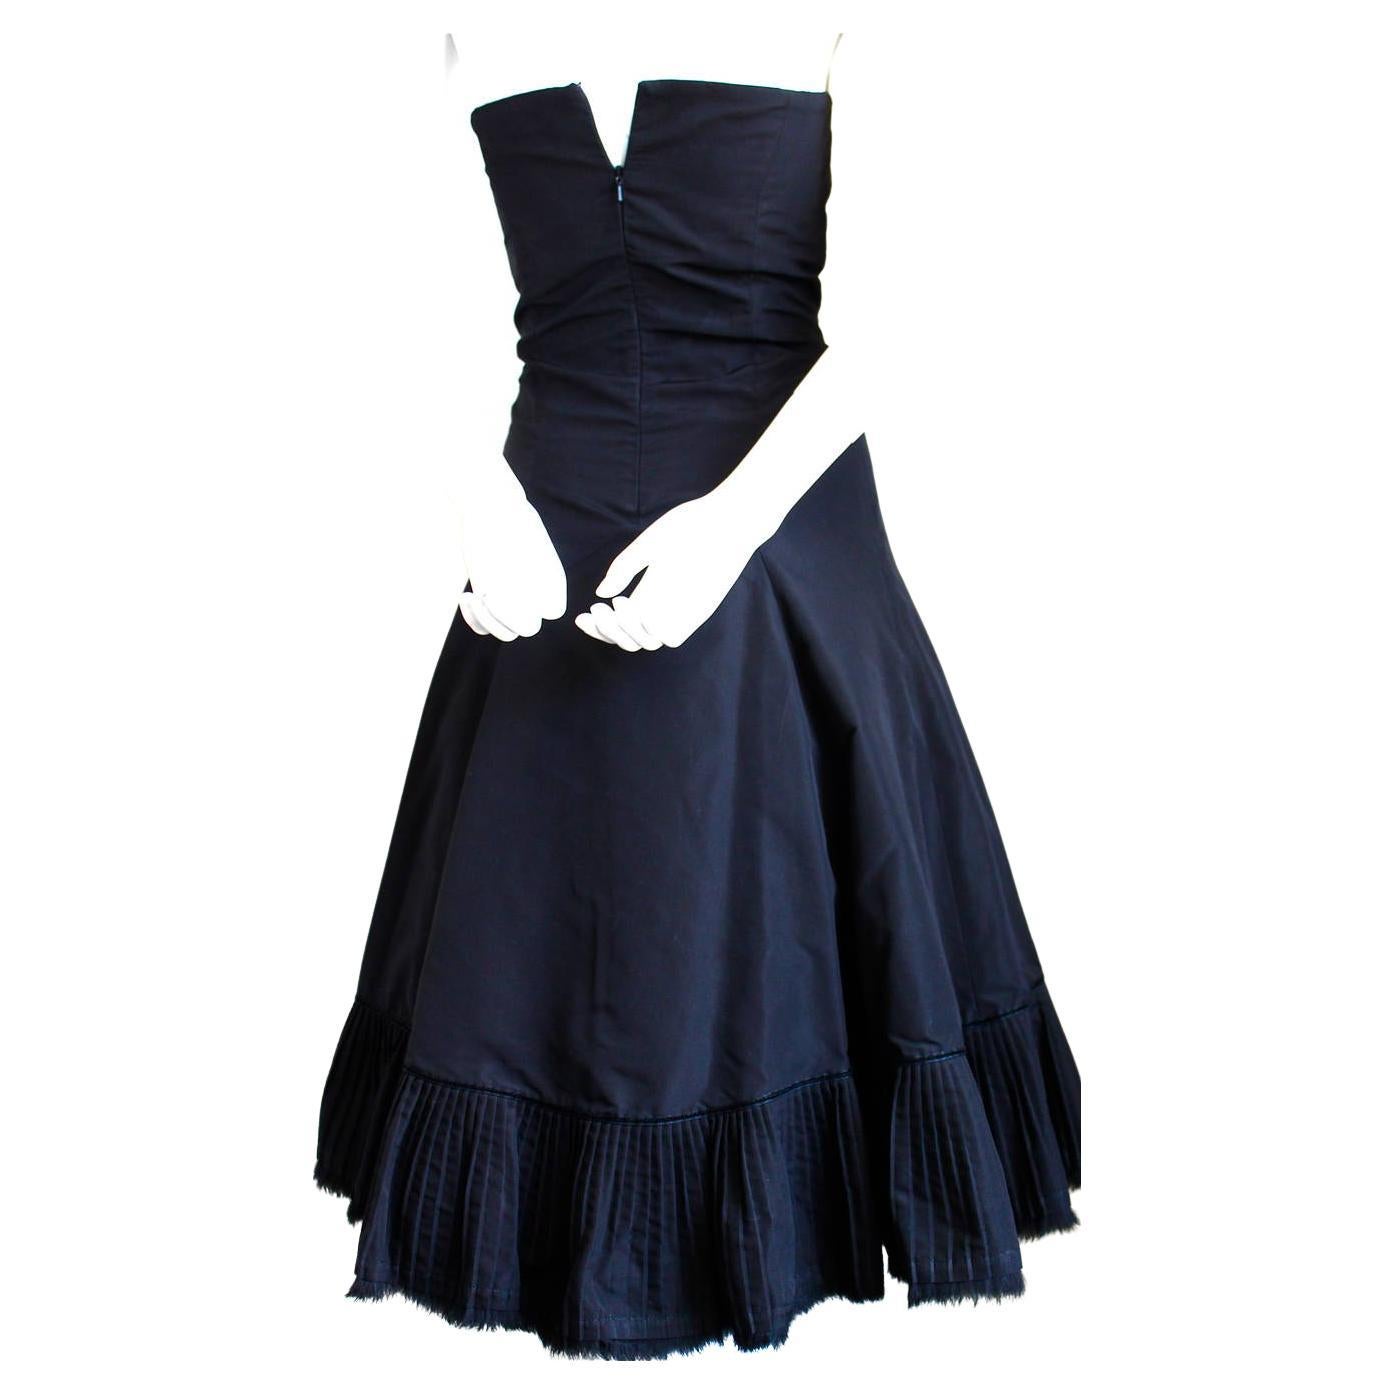 Jet-black taffeta strapless dress with pleated hemline trimmed in fur from Alexander McQueen dating to fall of 2003. Best fits a slim size 2. Approximate measurements: bust 31-32